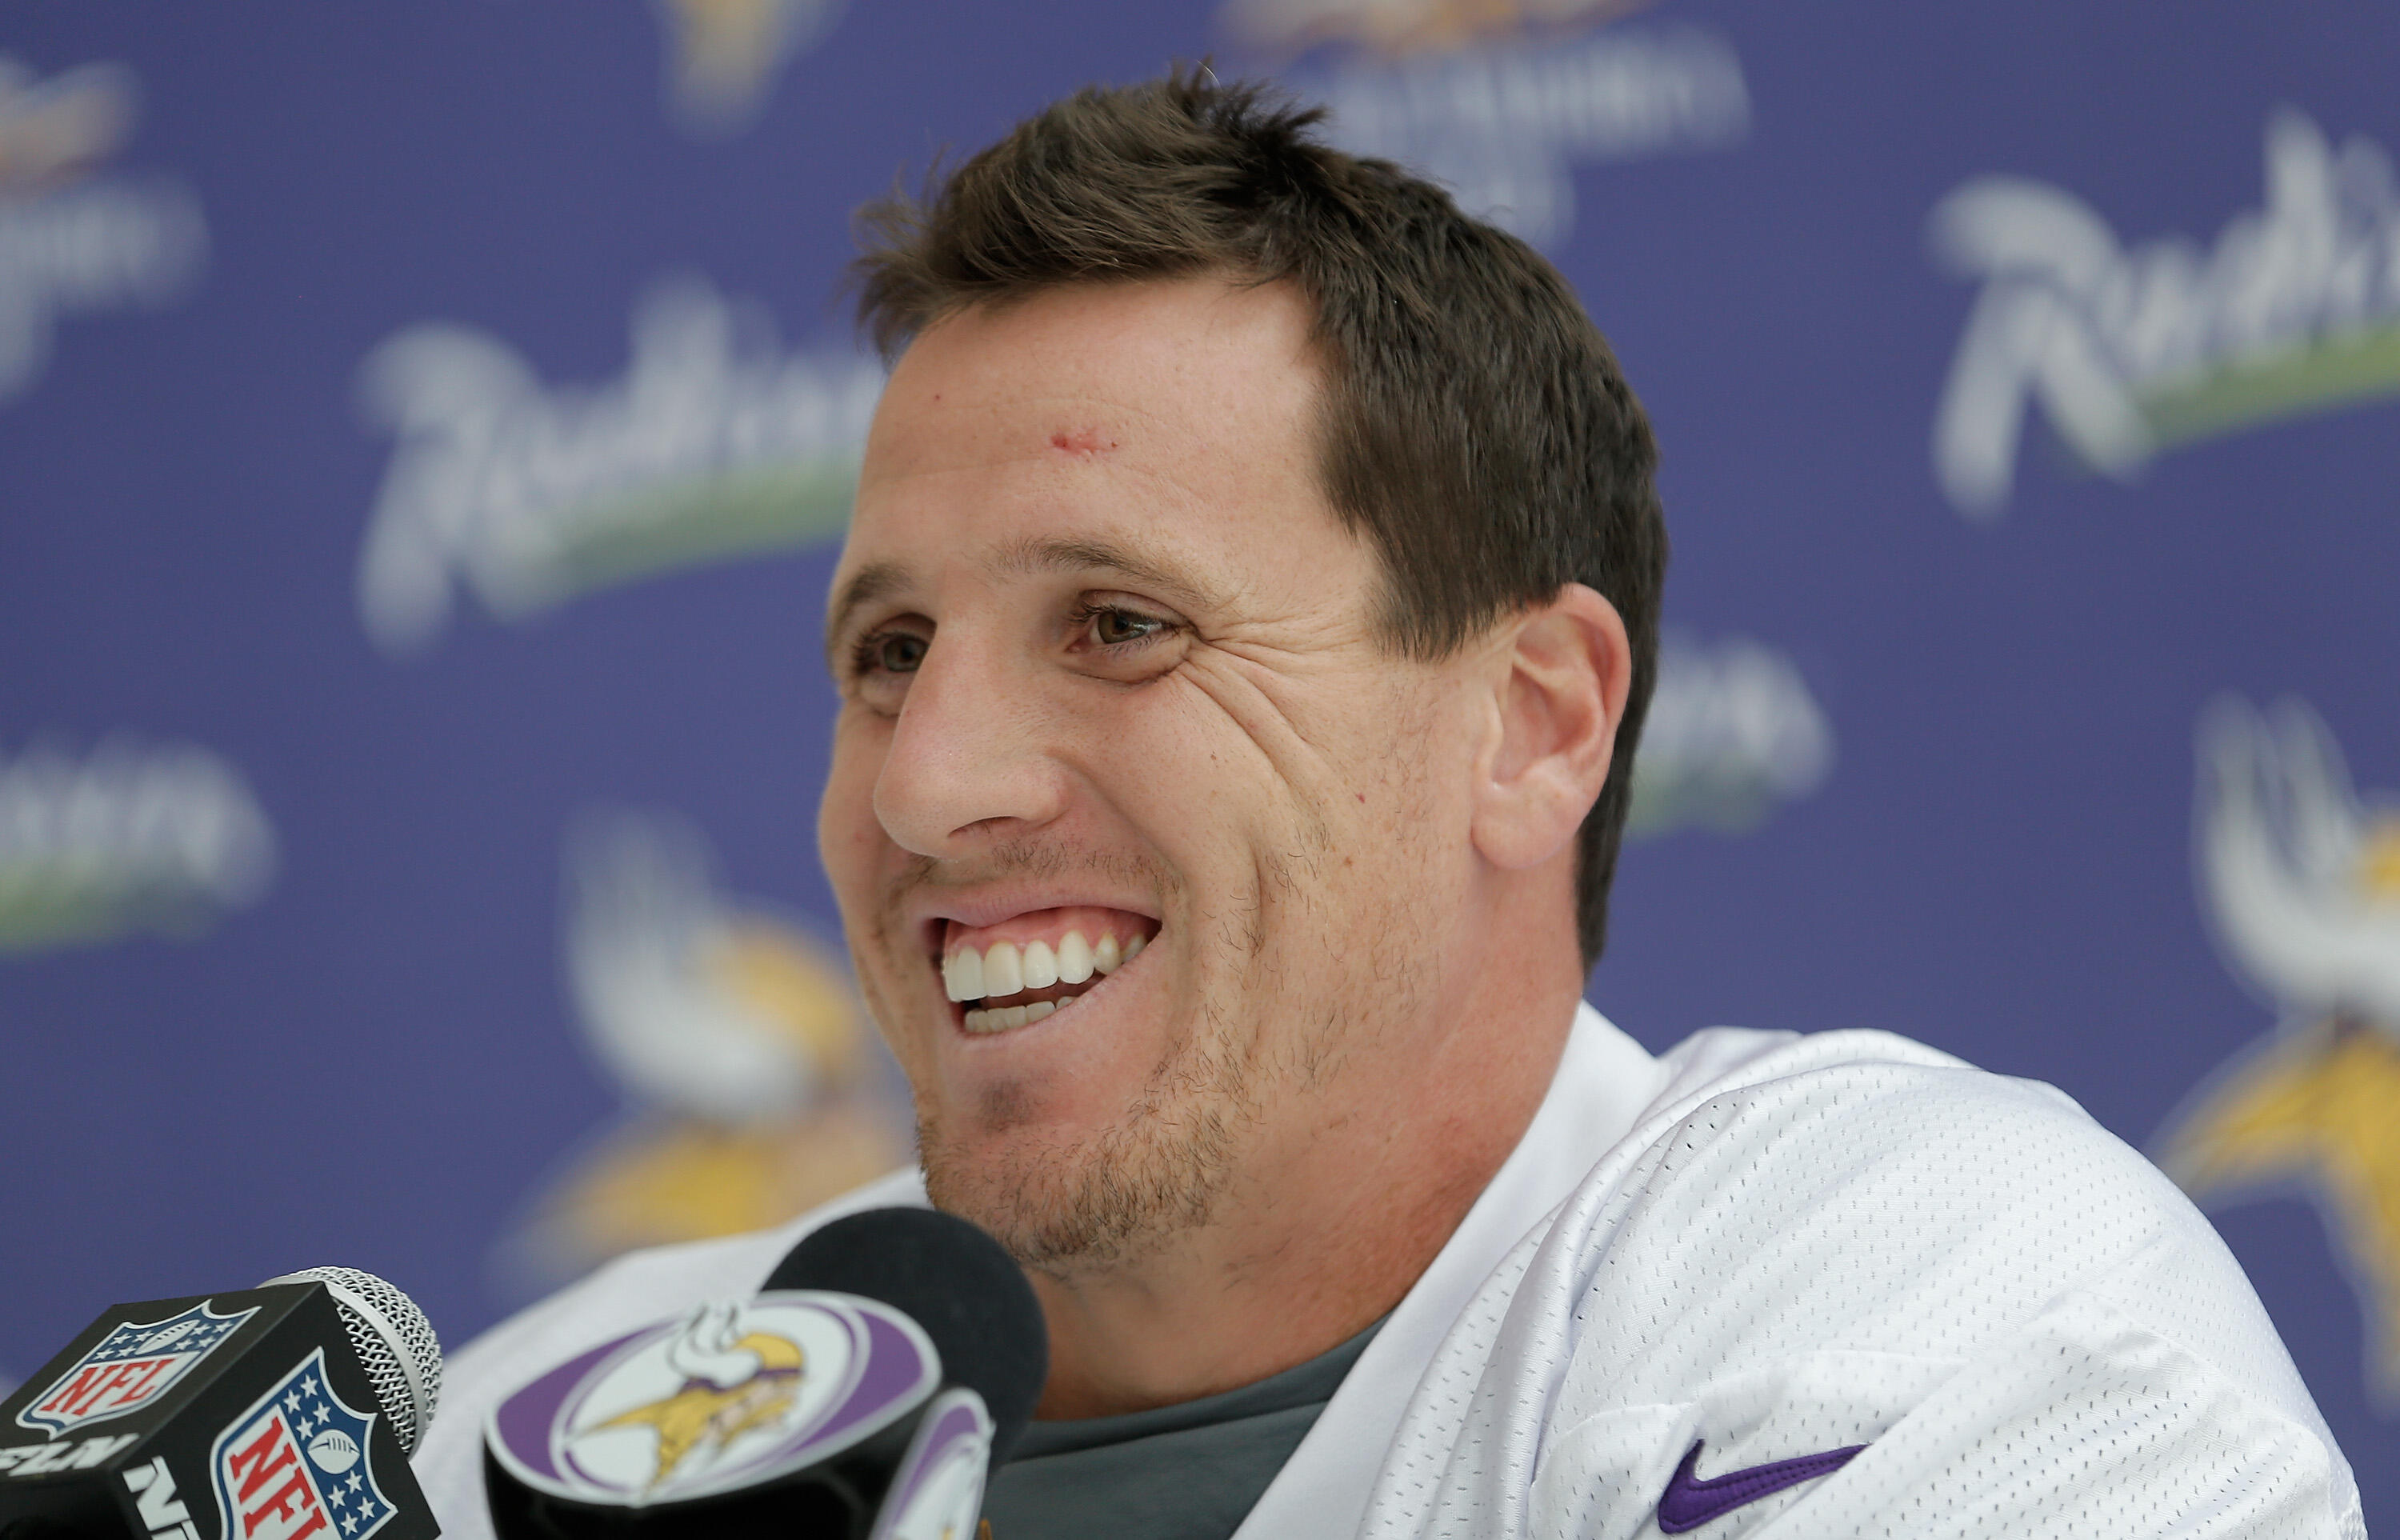 LONDON, ENGLAND - SEPTEMBER 26:  Linebacker Chad Greenway talks to members of the press during a Minnesota Vikings press conference at the Grove Hotel on September 26, 2013 in London, England.  (Photo by Harry Engels/Getty Images)